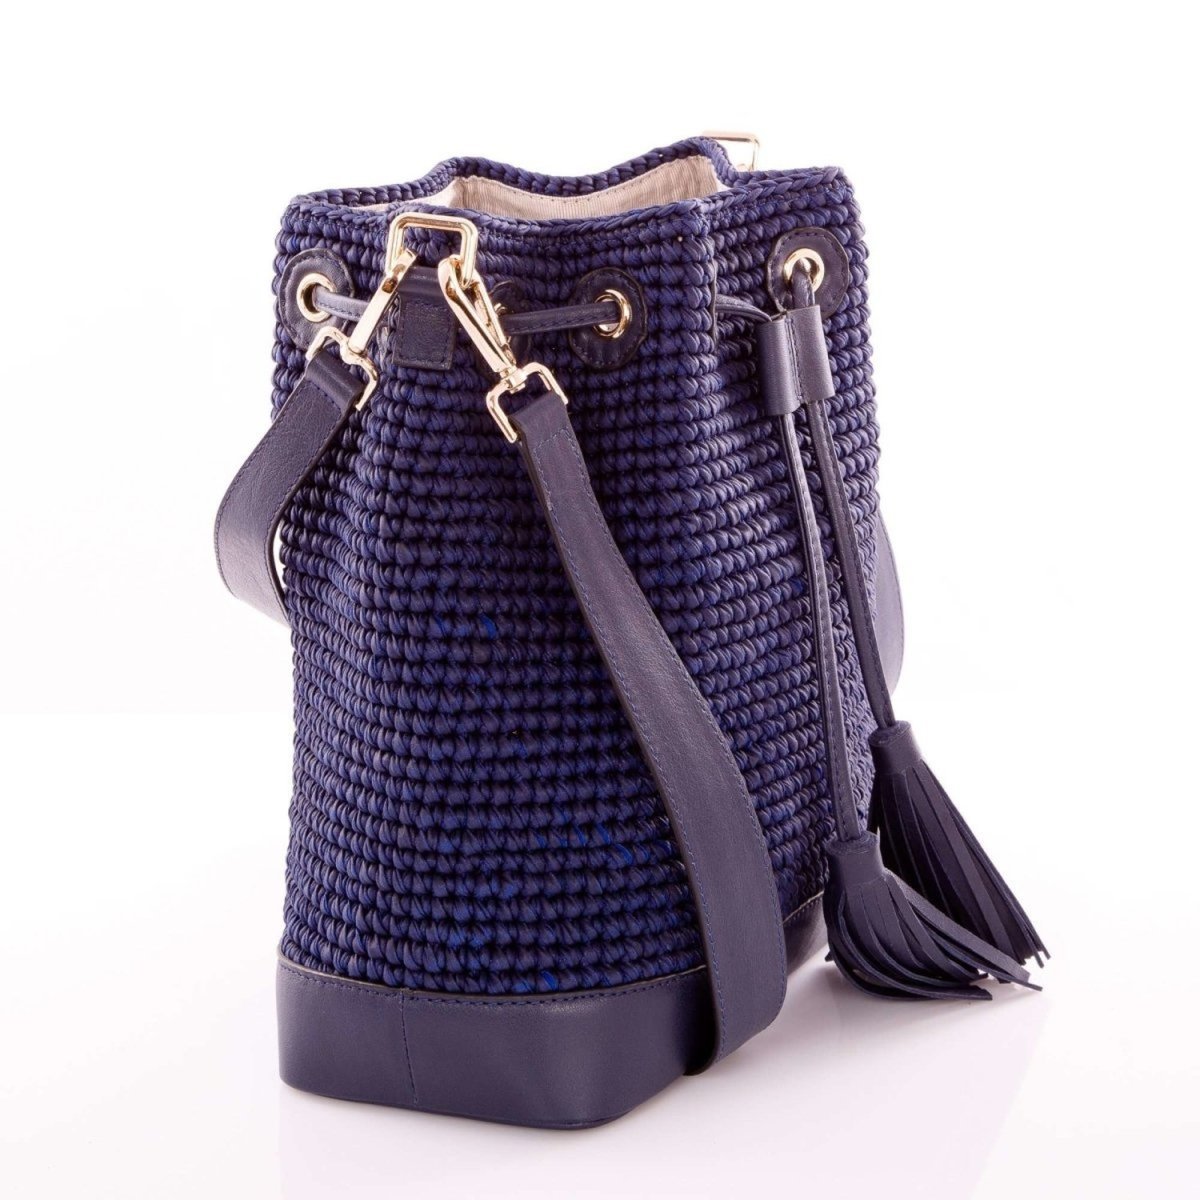 Hand Made Waxed Rope Handbag with Leather Straps - Ozzell London